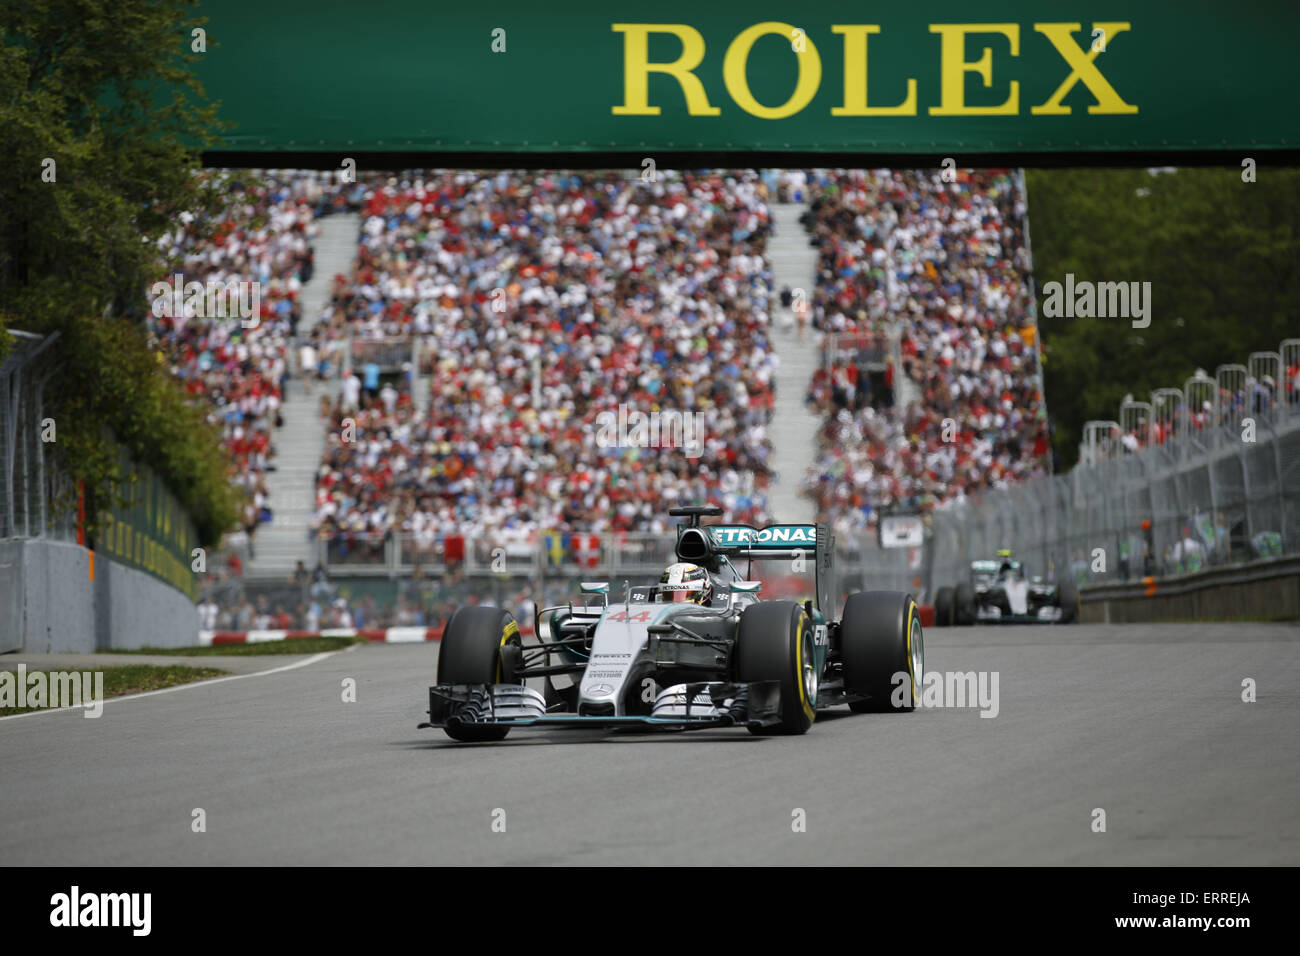 Montreal, Canada. 7th June, 2015. LEWIS HAMILTON of Great Britain and Mercedes AMG Petronas F1 Team drives during the 2015 Formula 1 Canadian Grand Prix at Gilles Villeneuve Circuit in Montreal, Canada. © James Gasperotti/ZUMA Wire/Alamy Live News Stock Photo